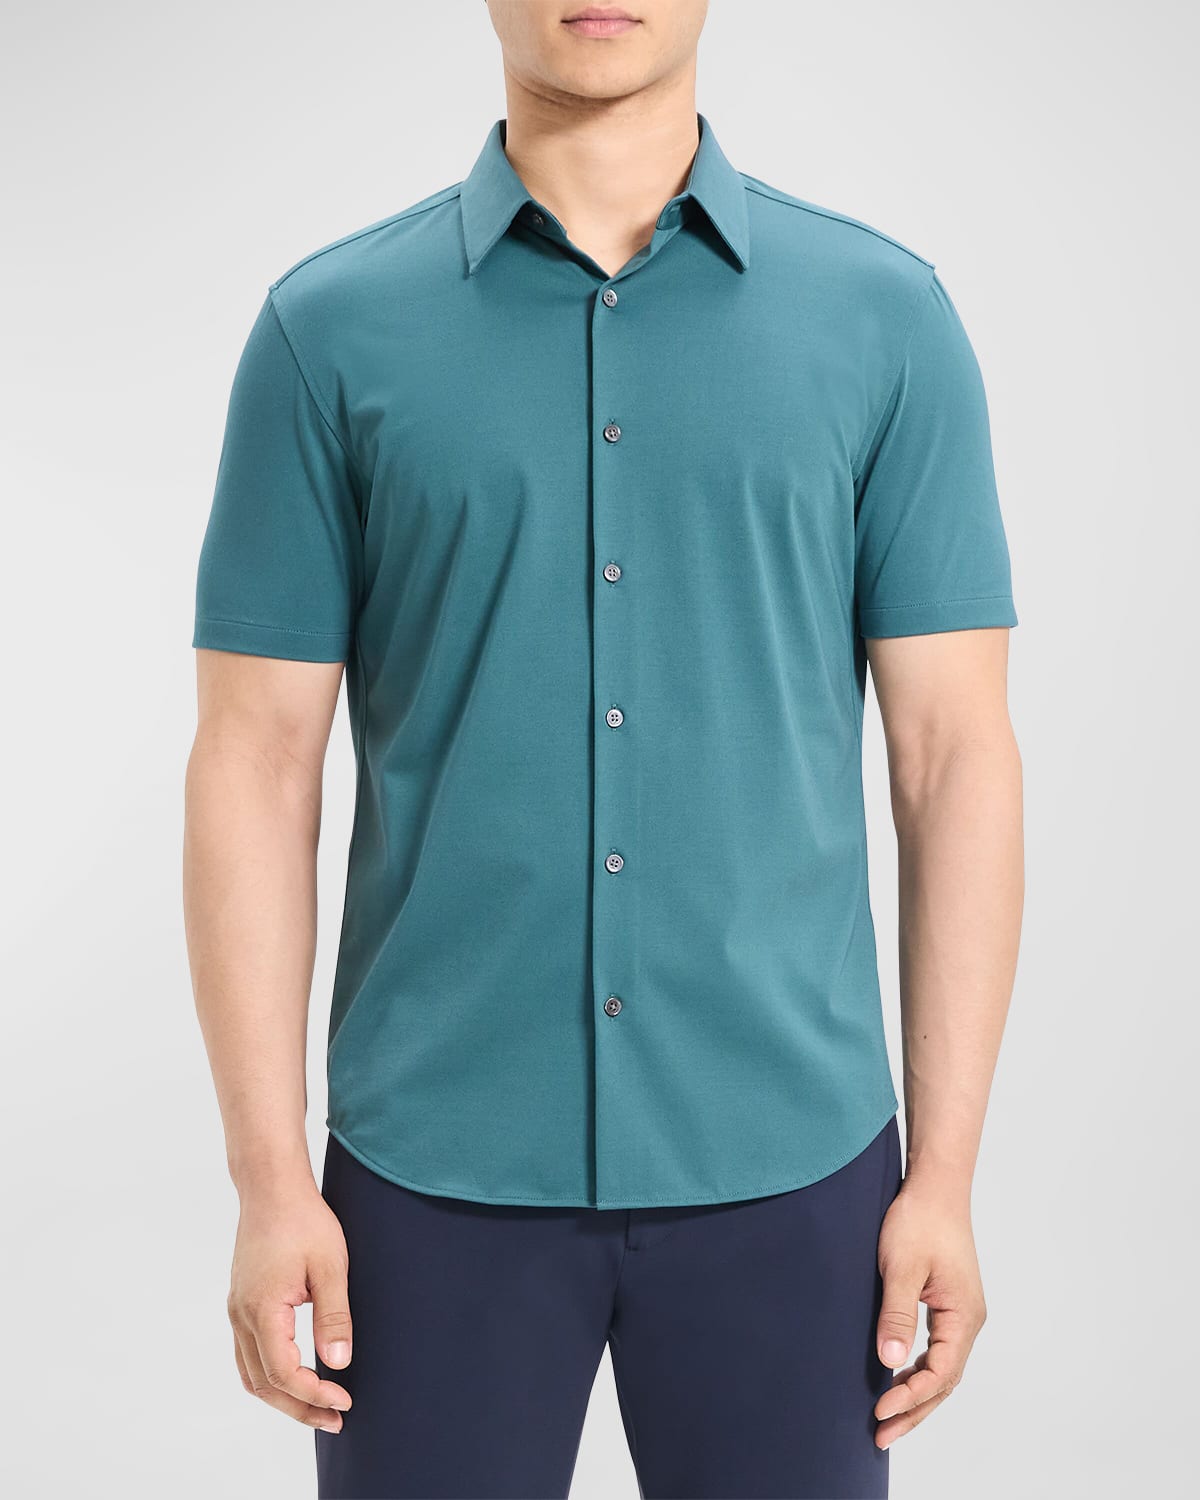 THEORY MEN'S IRVING STRUCTURED SPORT SHIRT